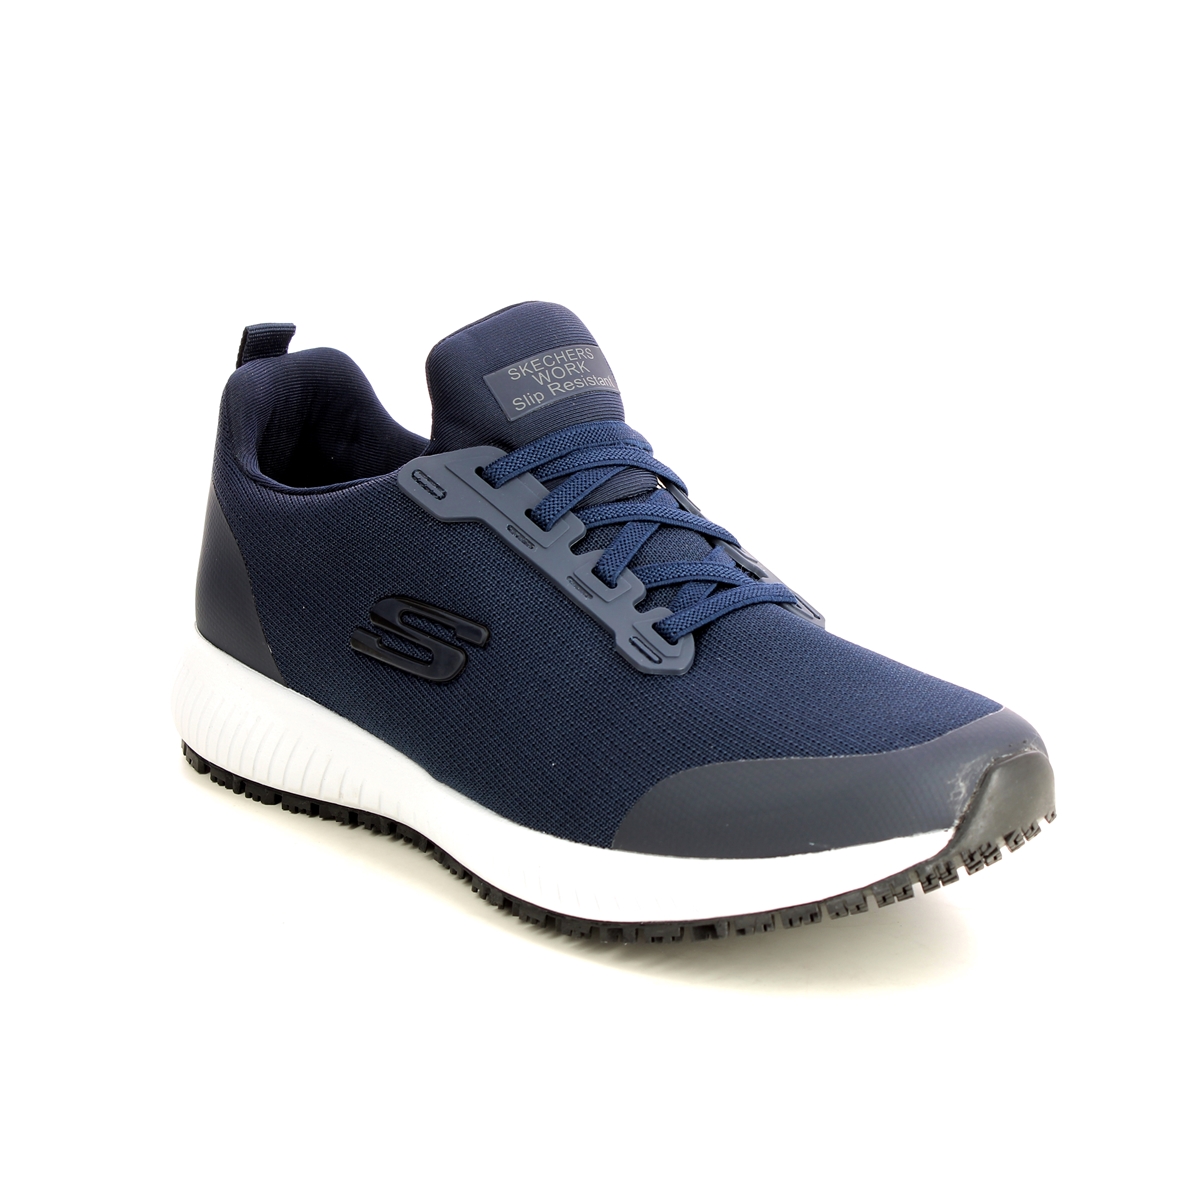 Skechers Work Squad Slip Resistant NVY Navy Womens trainers 77222EC in a Plain Textile in Size 9